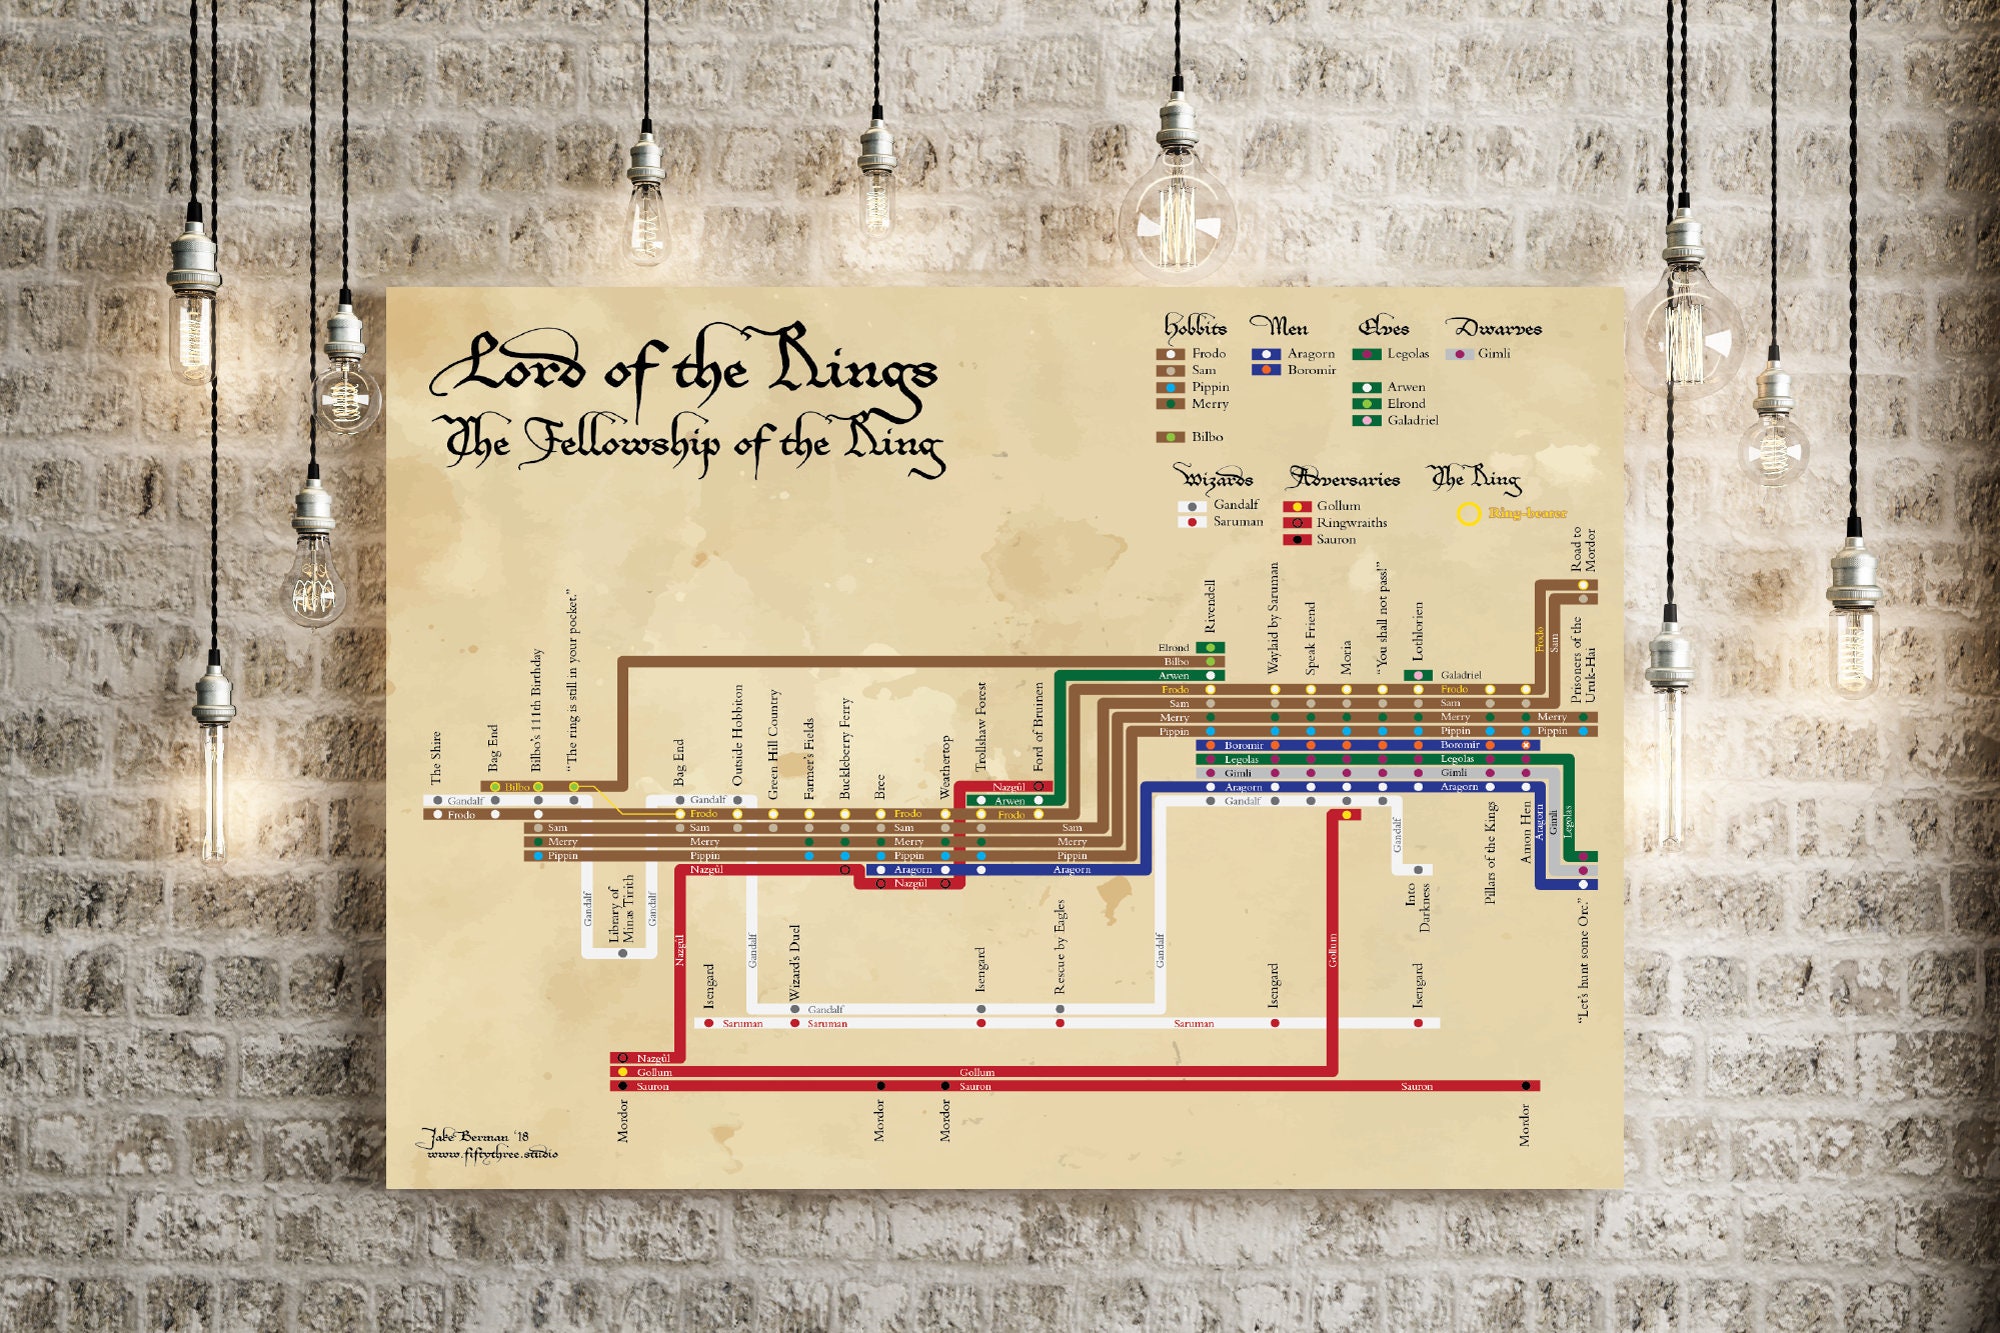 A Brilliant Diagram of the Lord of the Rings Movies | Infographic, Data  visualization design, Data visualization